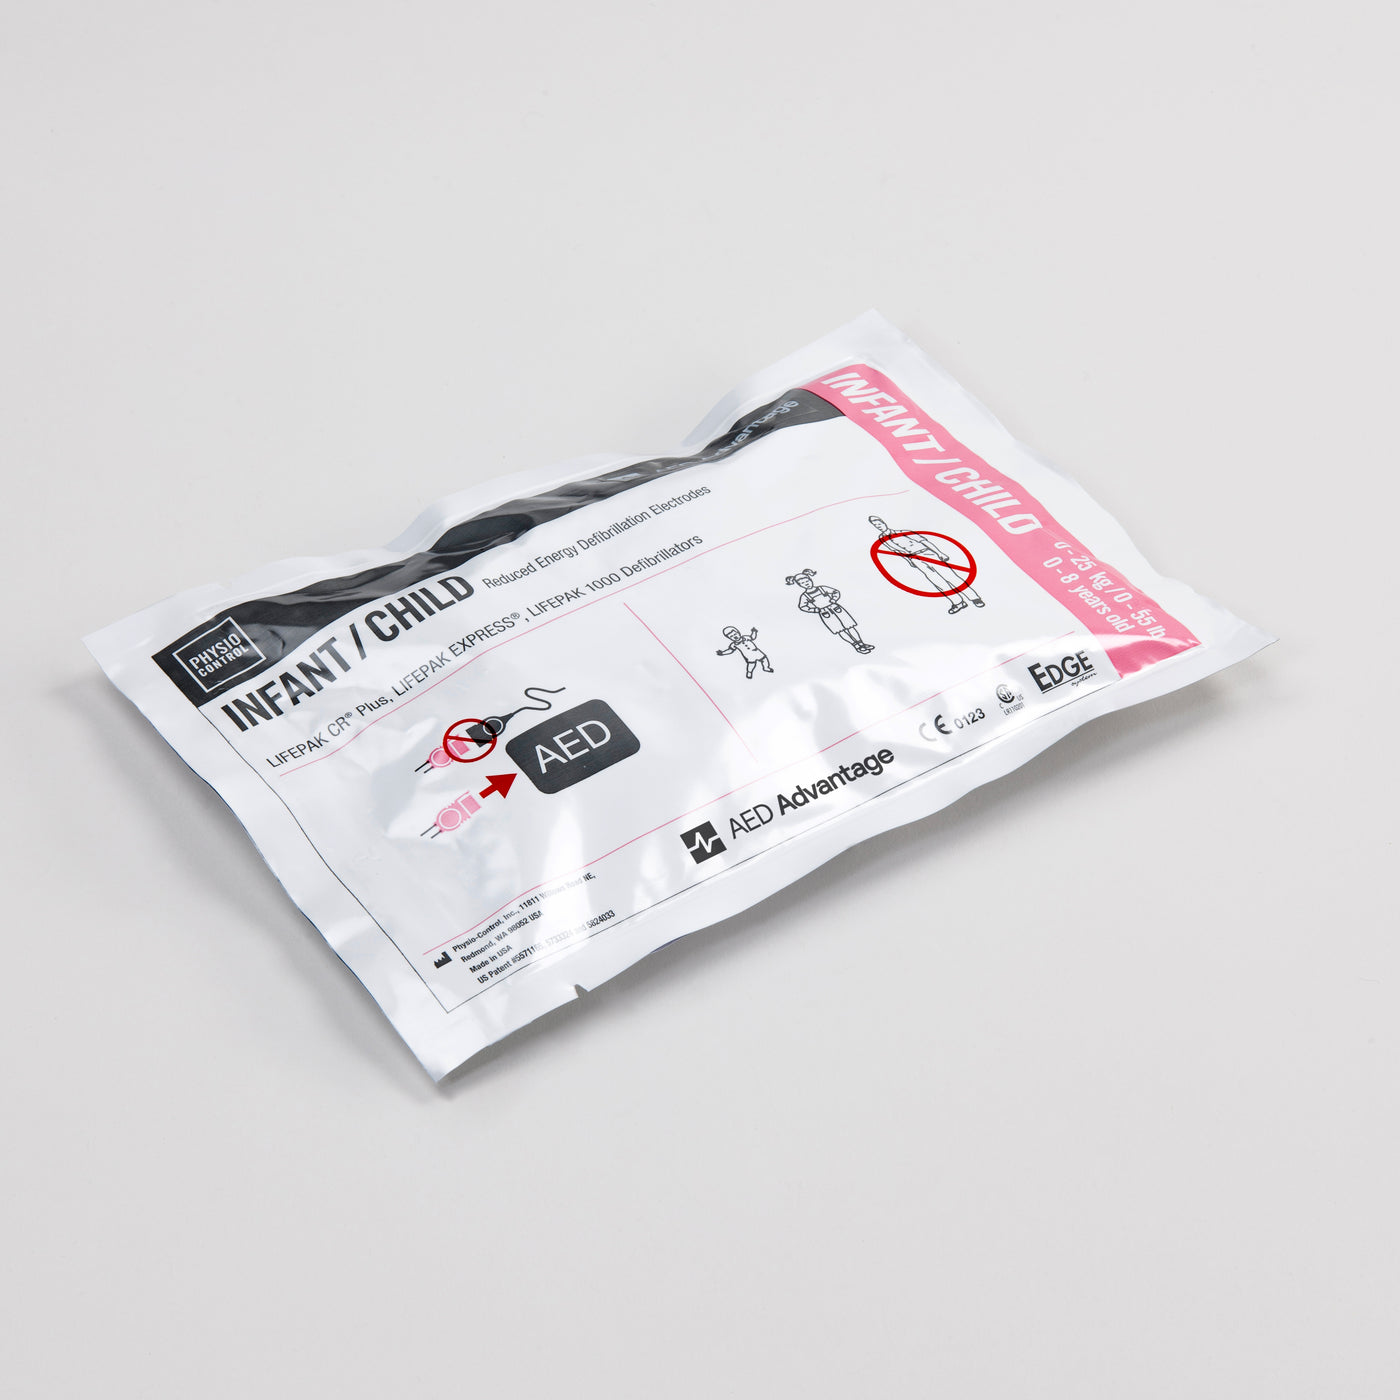 A white rectangular foil package containing pediatric pads for the LIFEPAK CR2 defibrillator